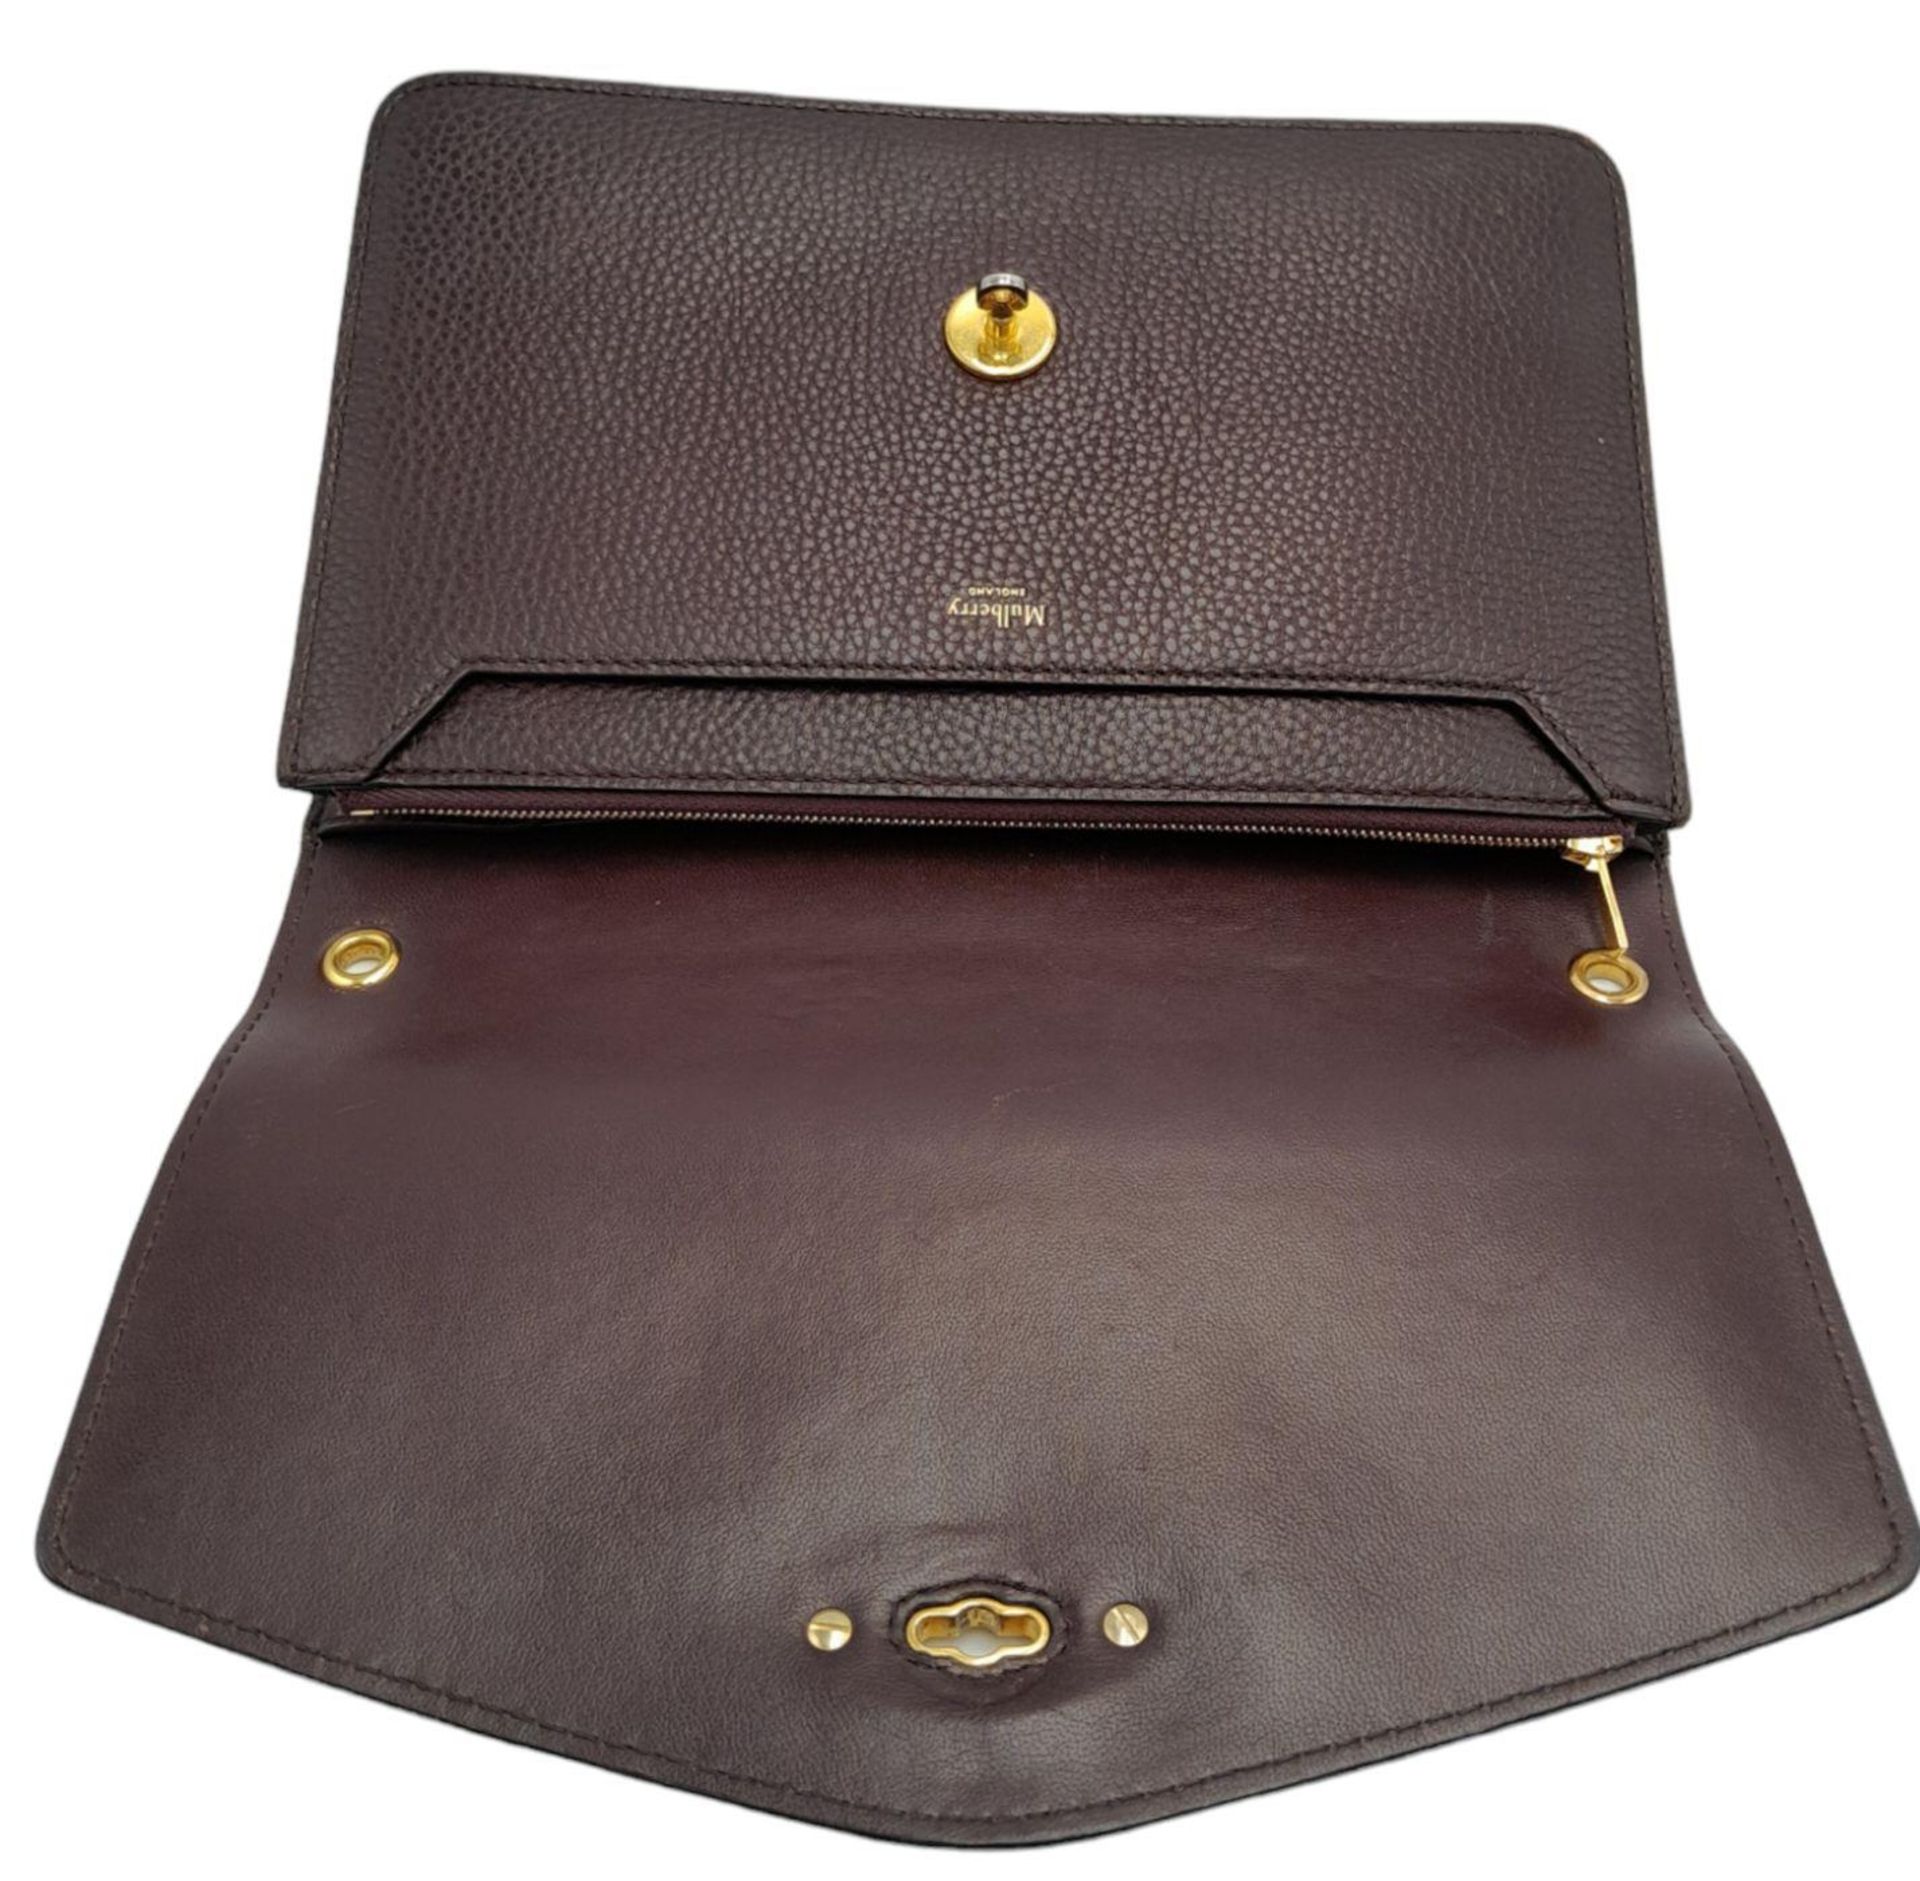 A Mulberry Oxblood Darley Bag. Leather exterior with gold-toned hardware and twist lock closure. - Image 3 of 10